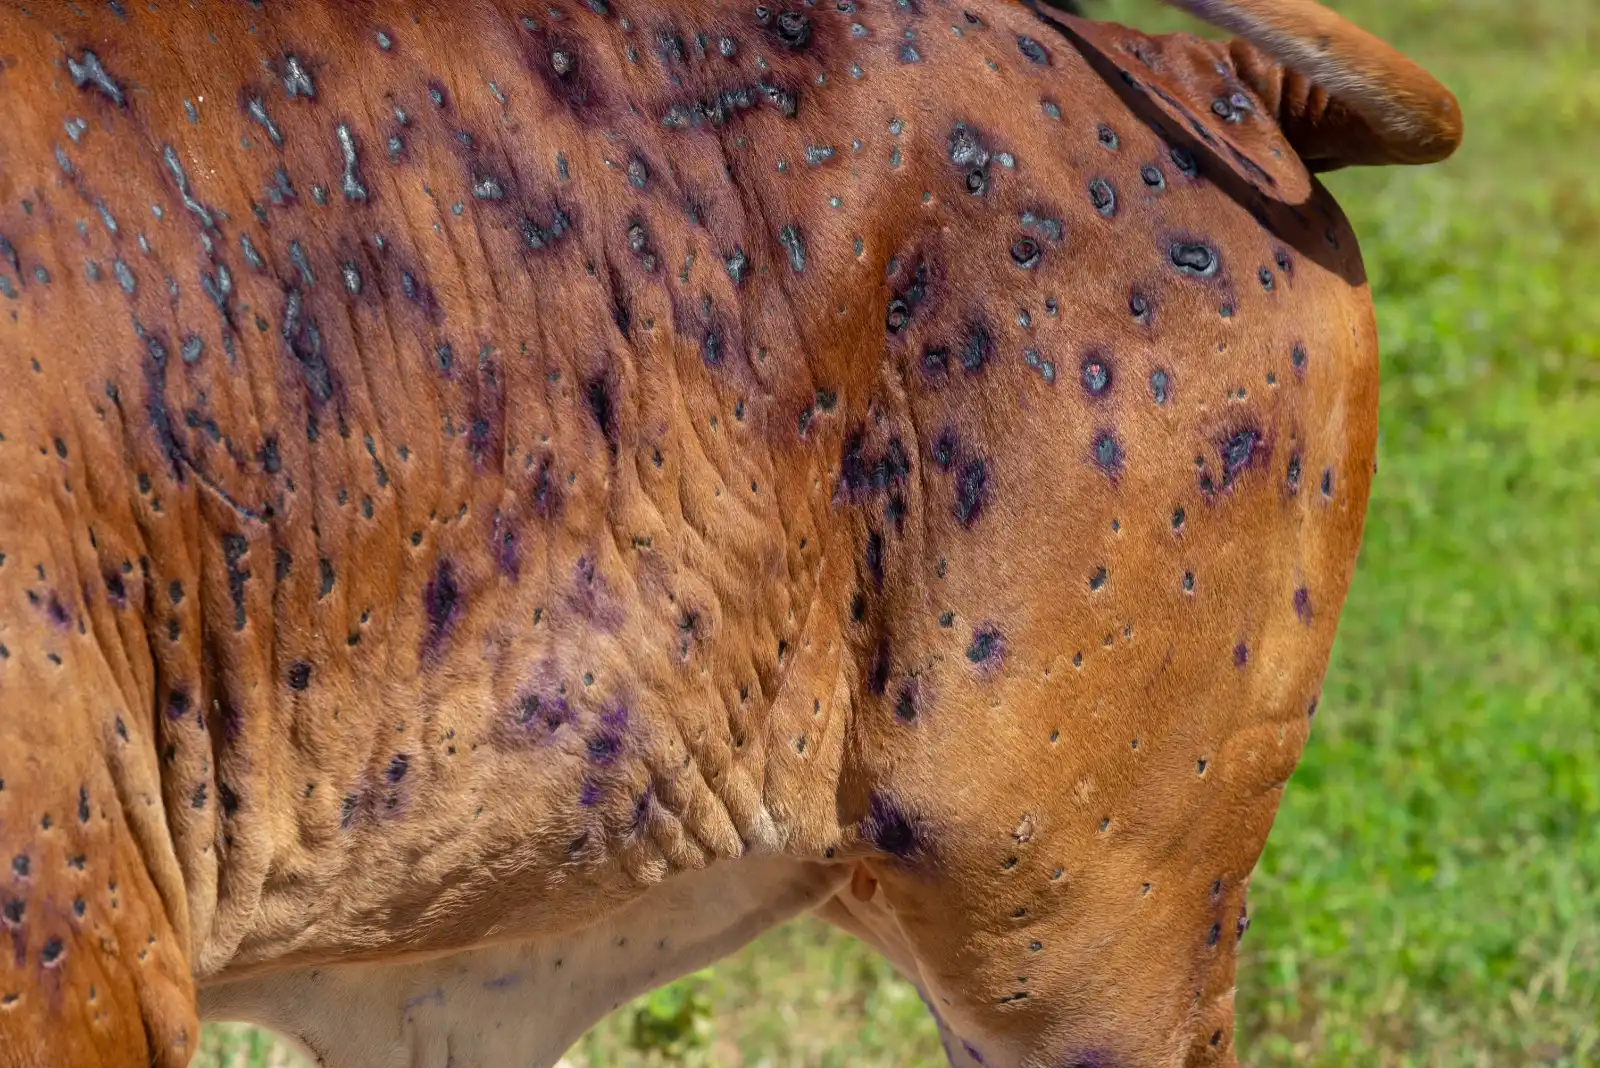 A close up a cow's hide, showing purple lumps and lesions